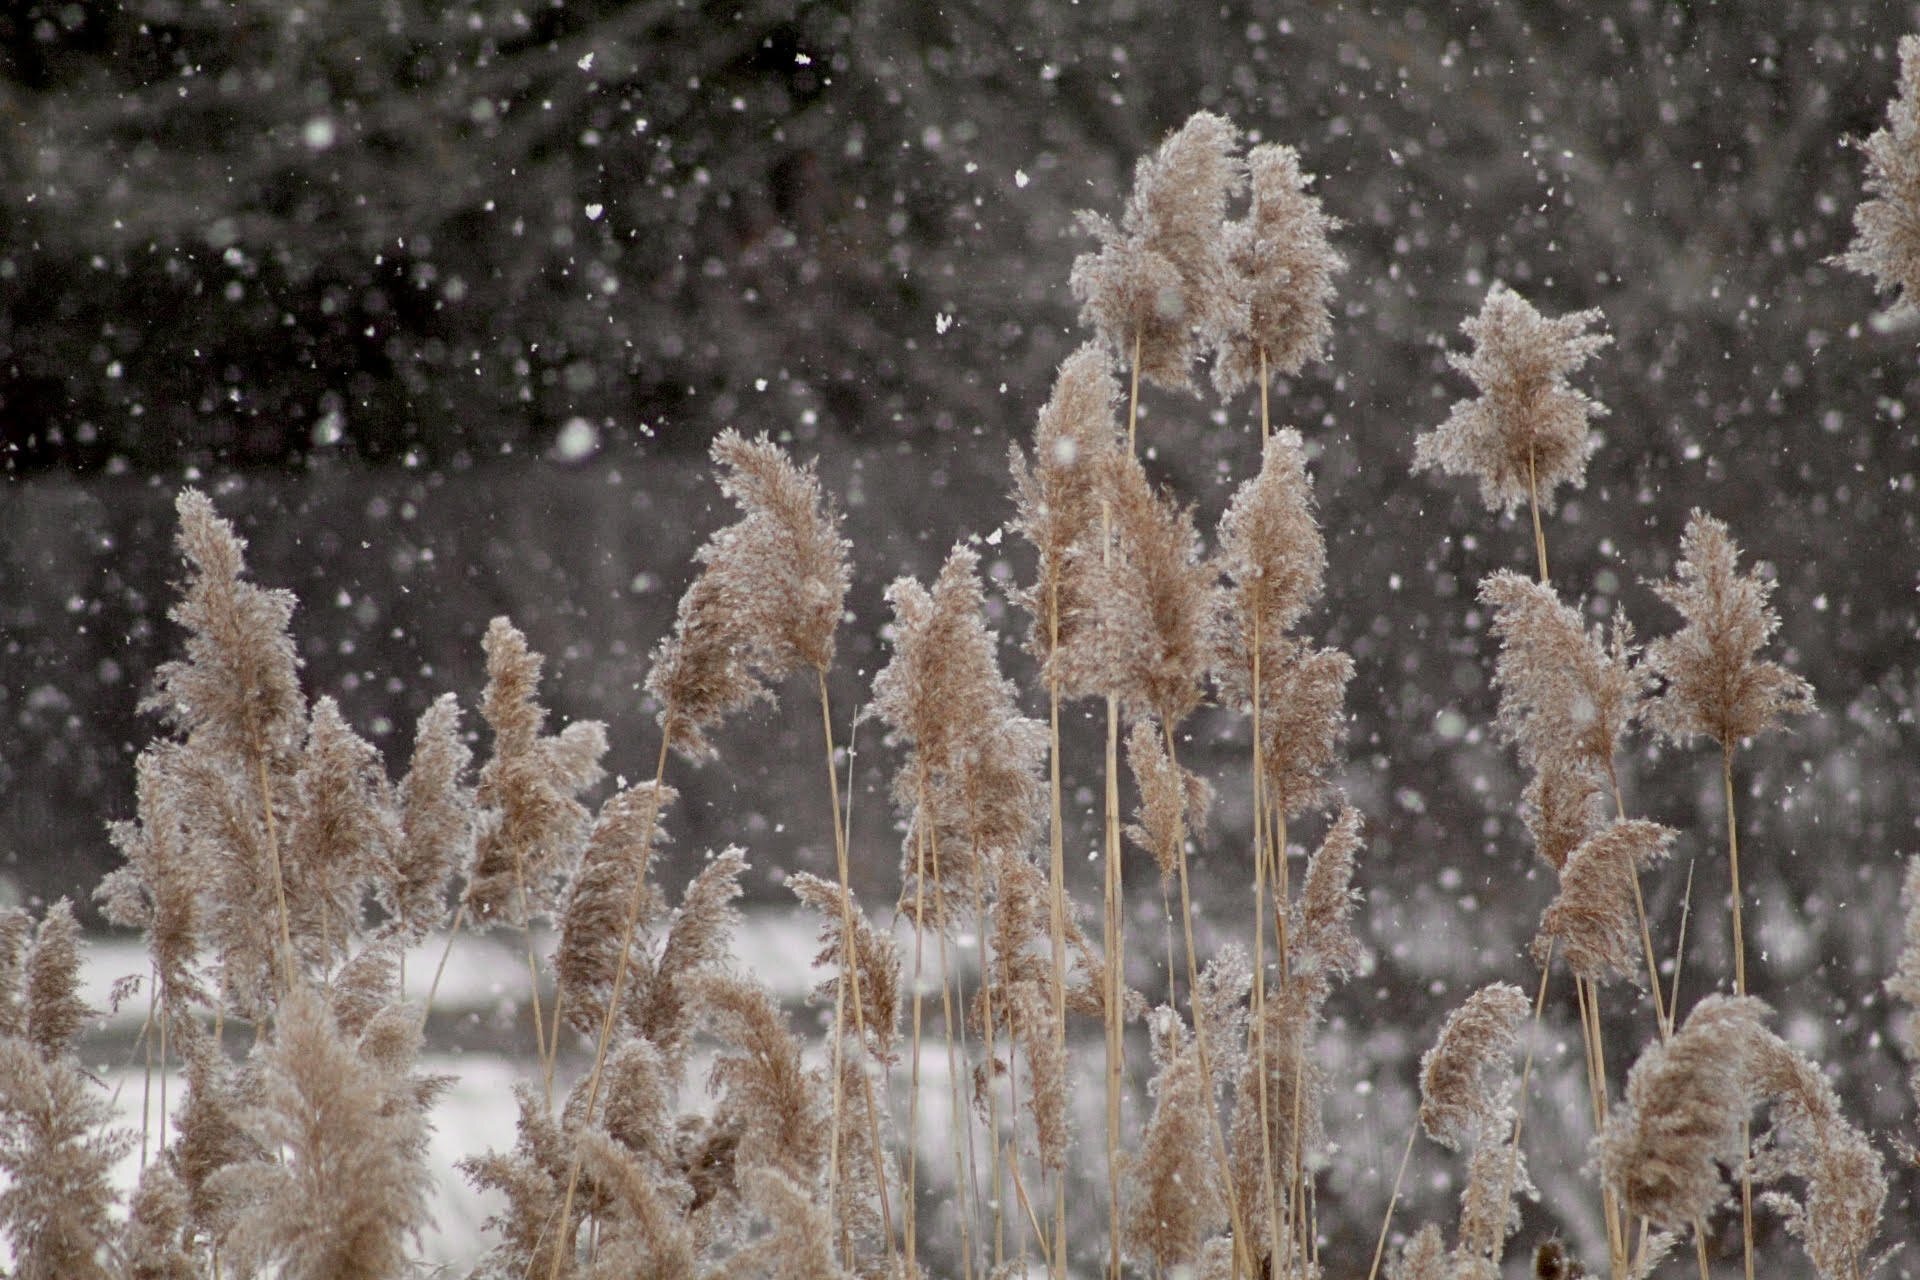 Amateur photographer Madelyn Dudde won third place in the Sterling Heights Nature Center's annual photography competition in January, for her image of snow falling on phragmites (reed grasses).